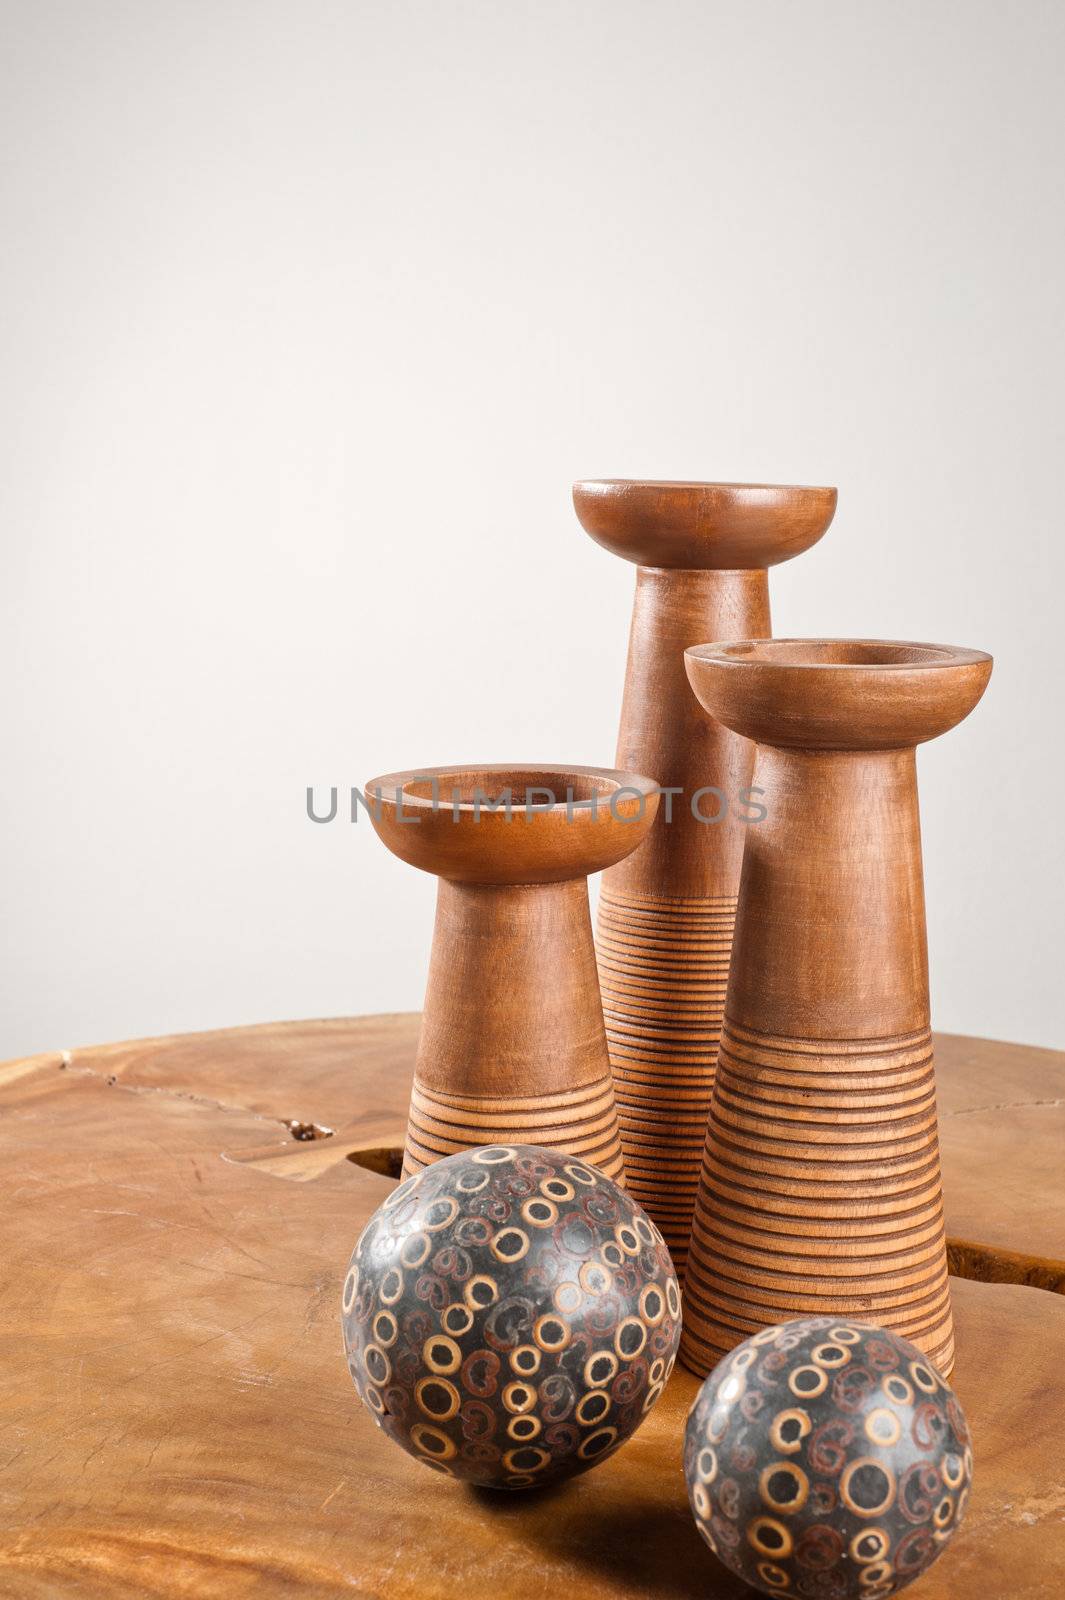 Candlesticks as interior decoration on wooden table